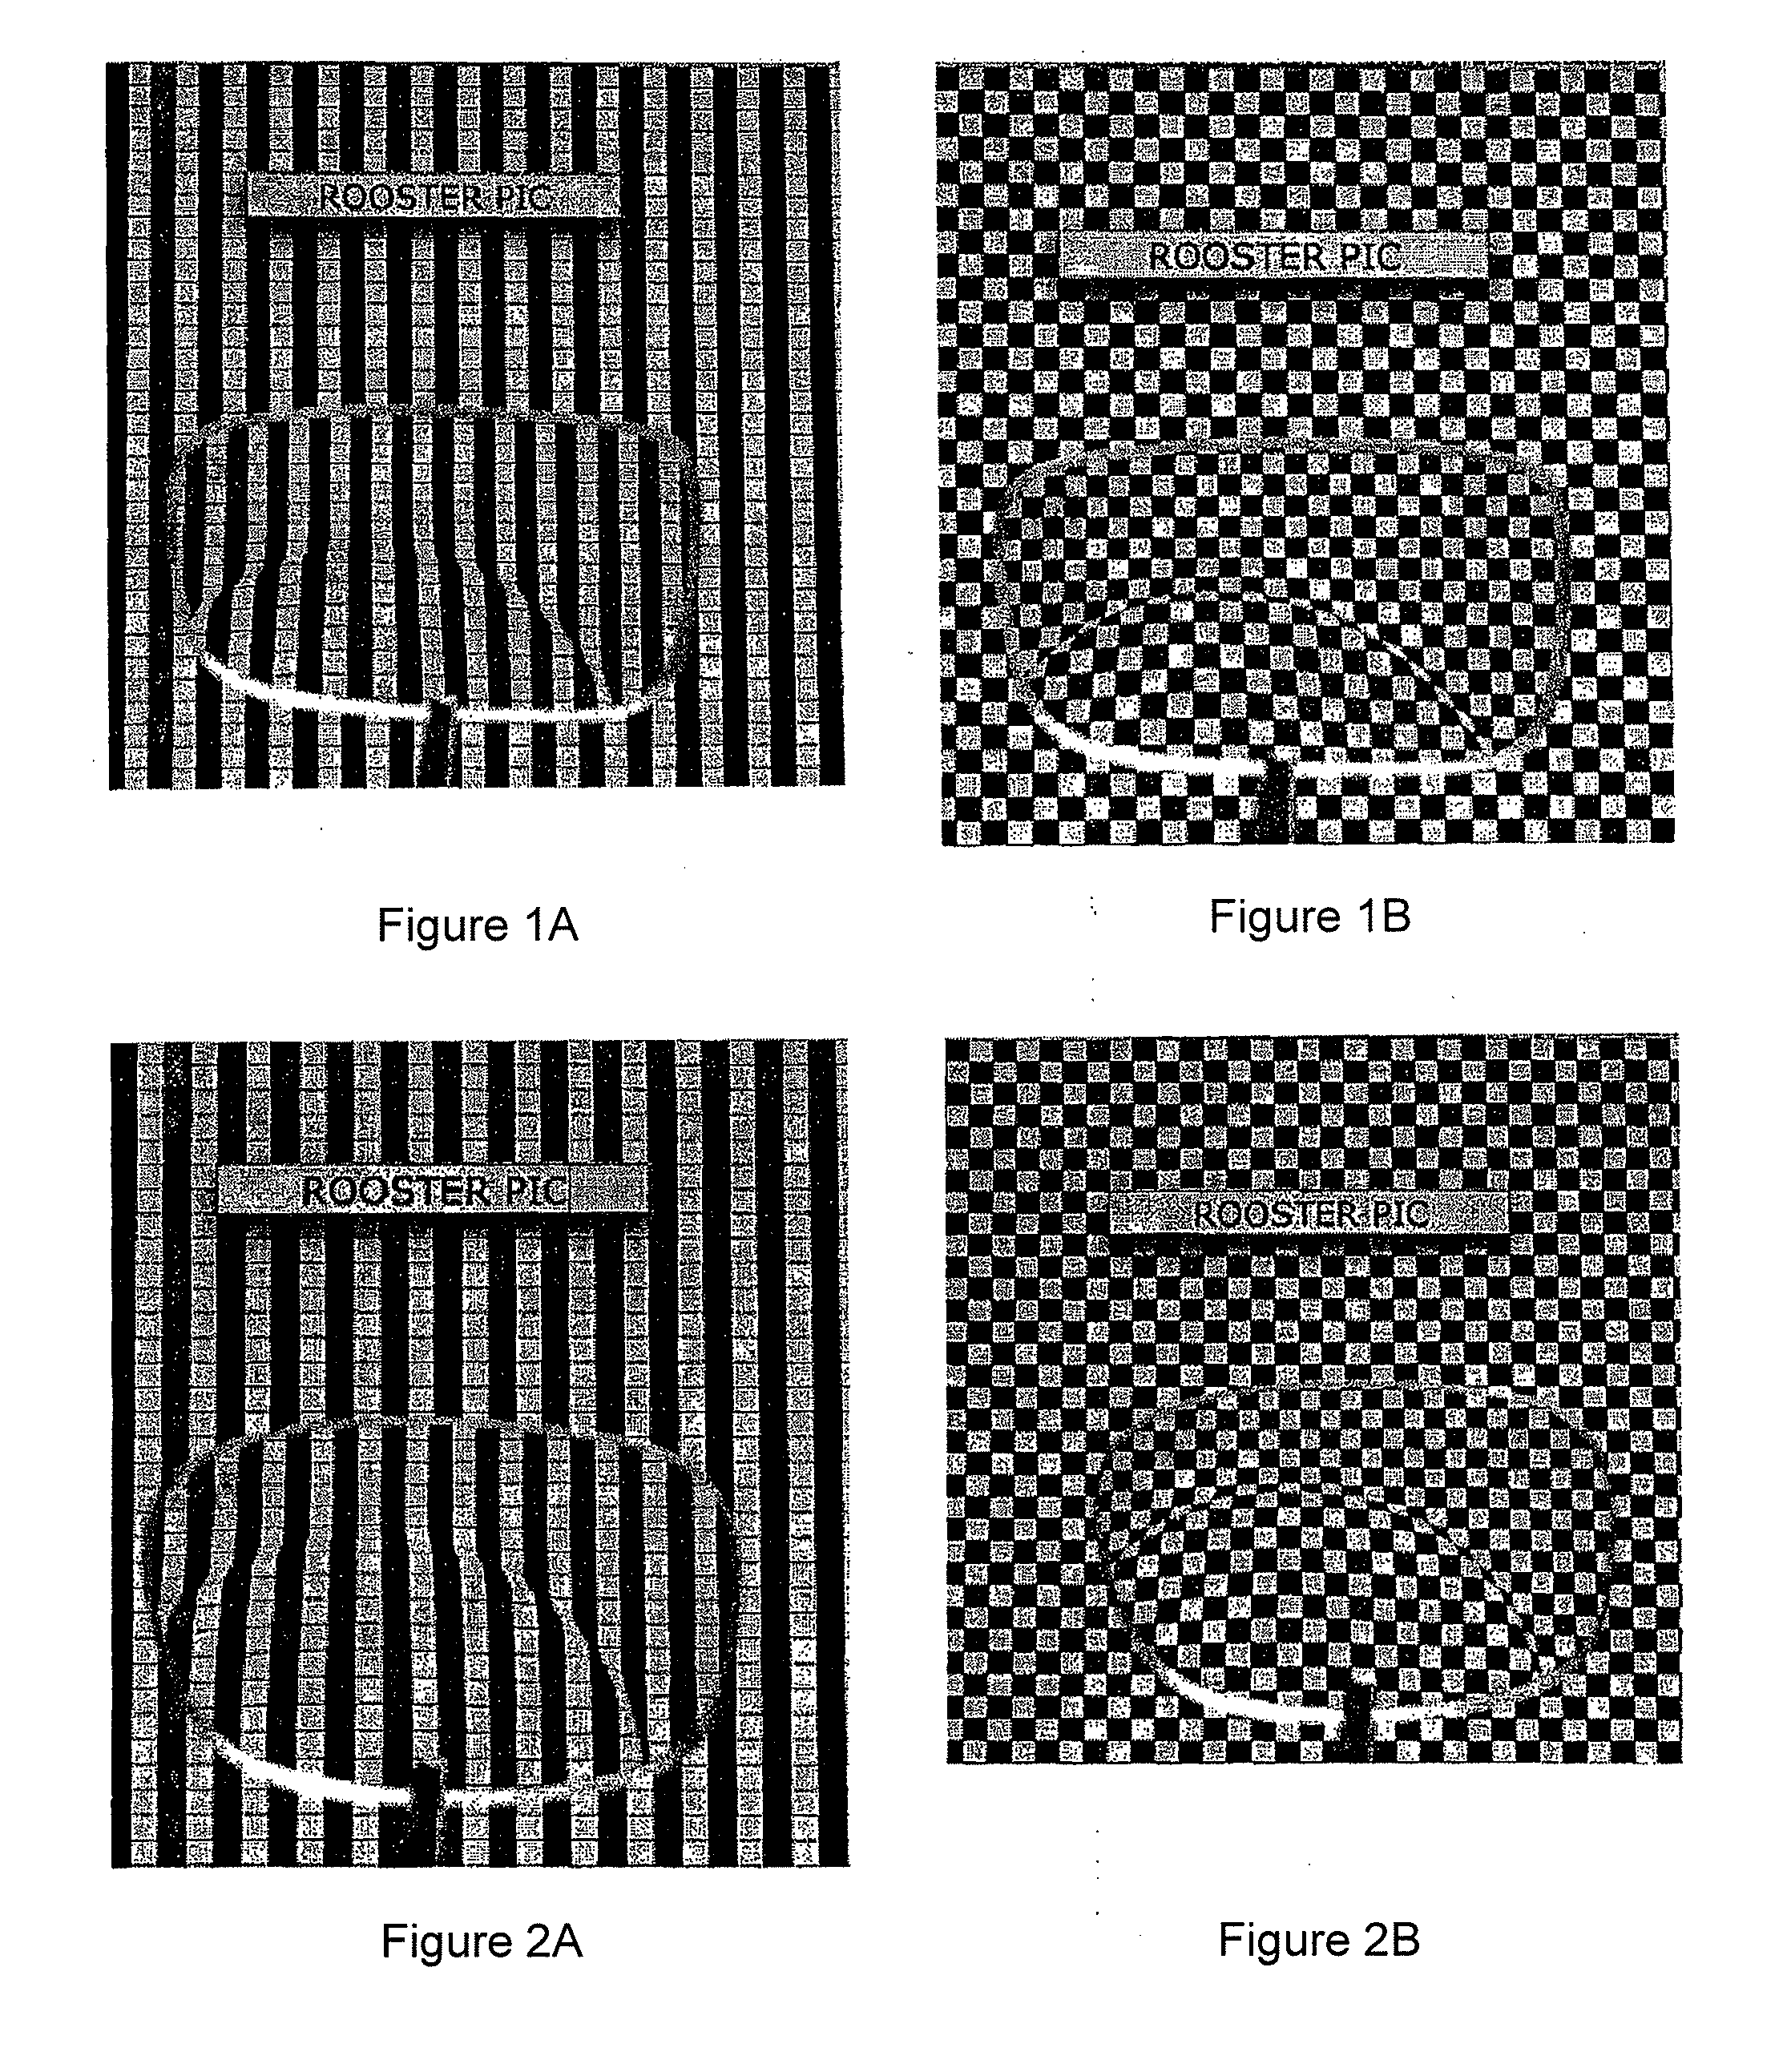 Multifocal lens having a progressive optical power region and a discontinuity